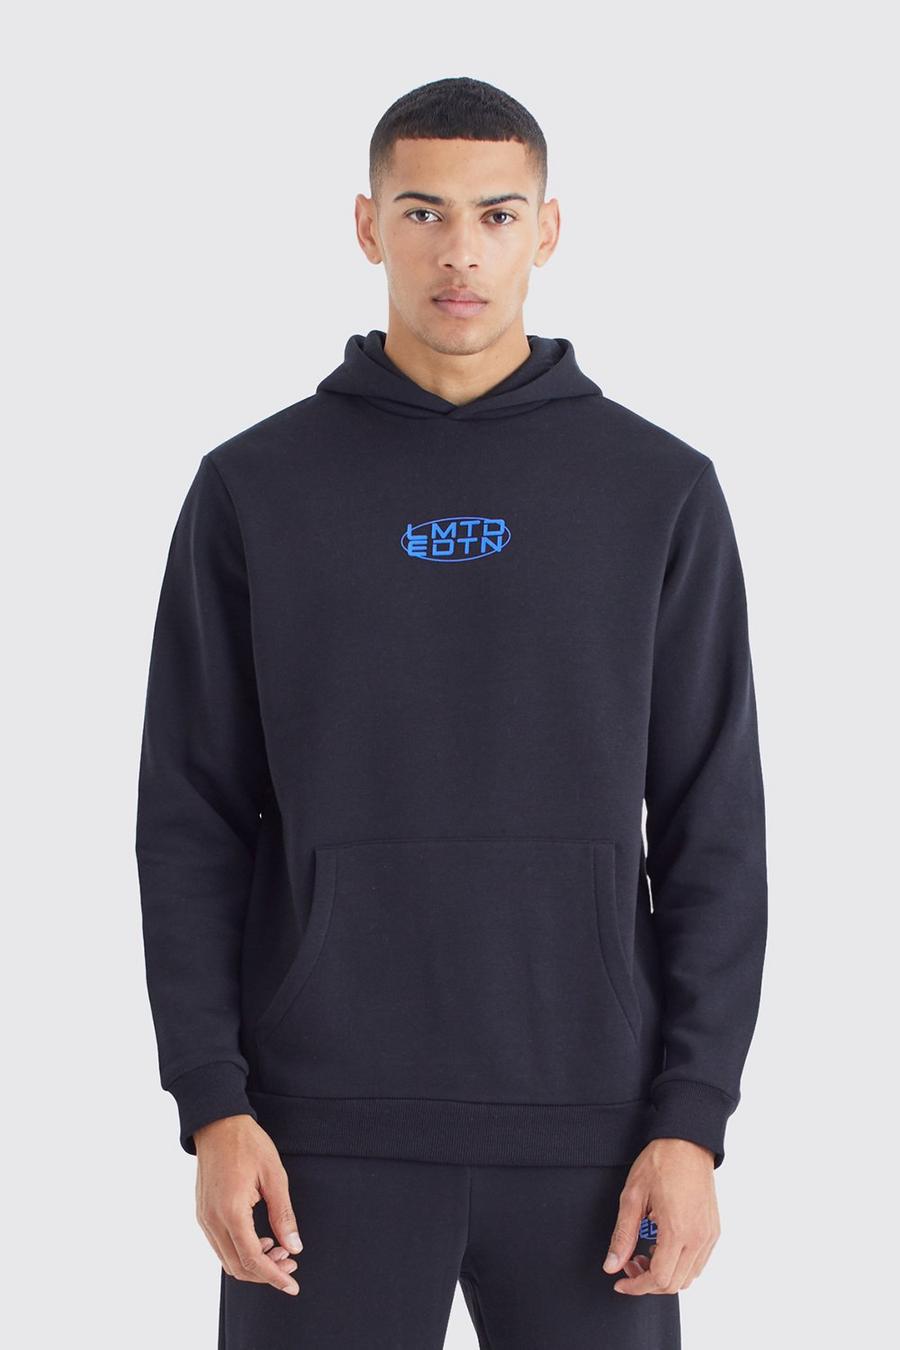 Black Basic Limited Over The Head Hoodie